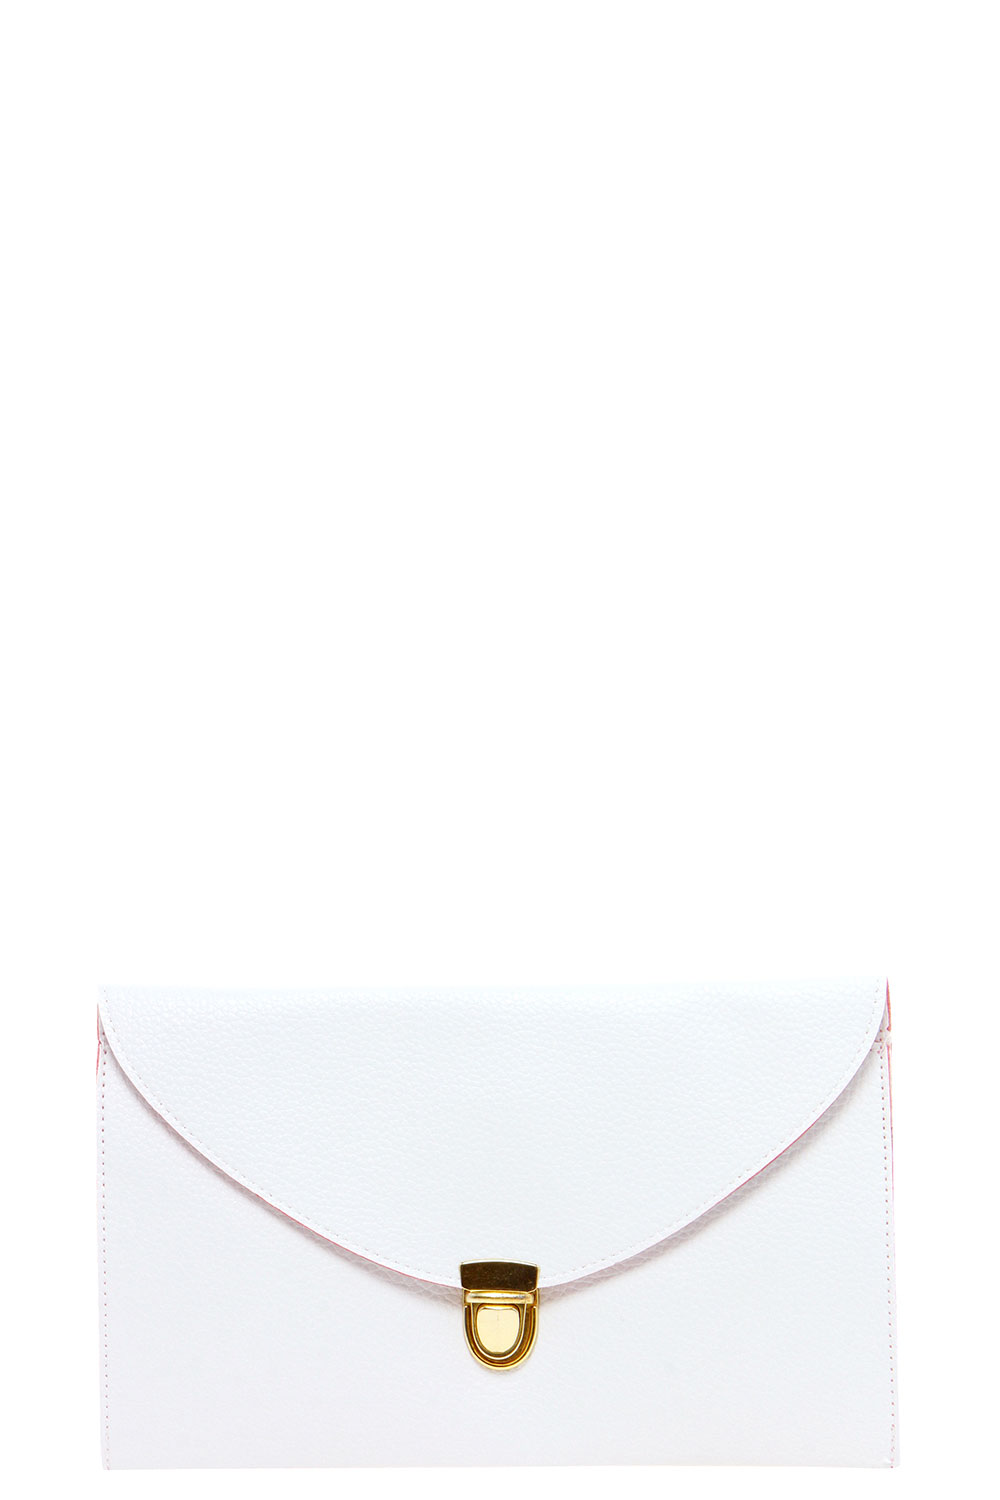 boohoo Lily Clasp Fasten Clutch Bag - white,